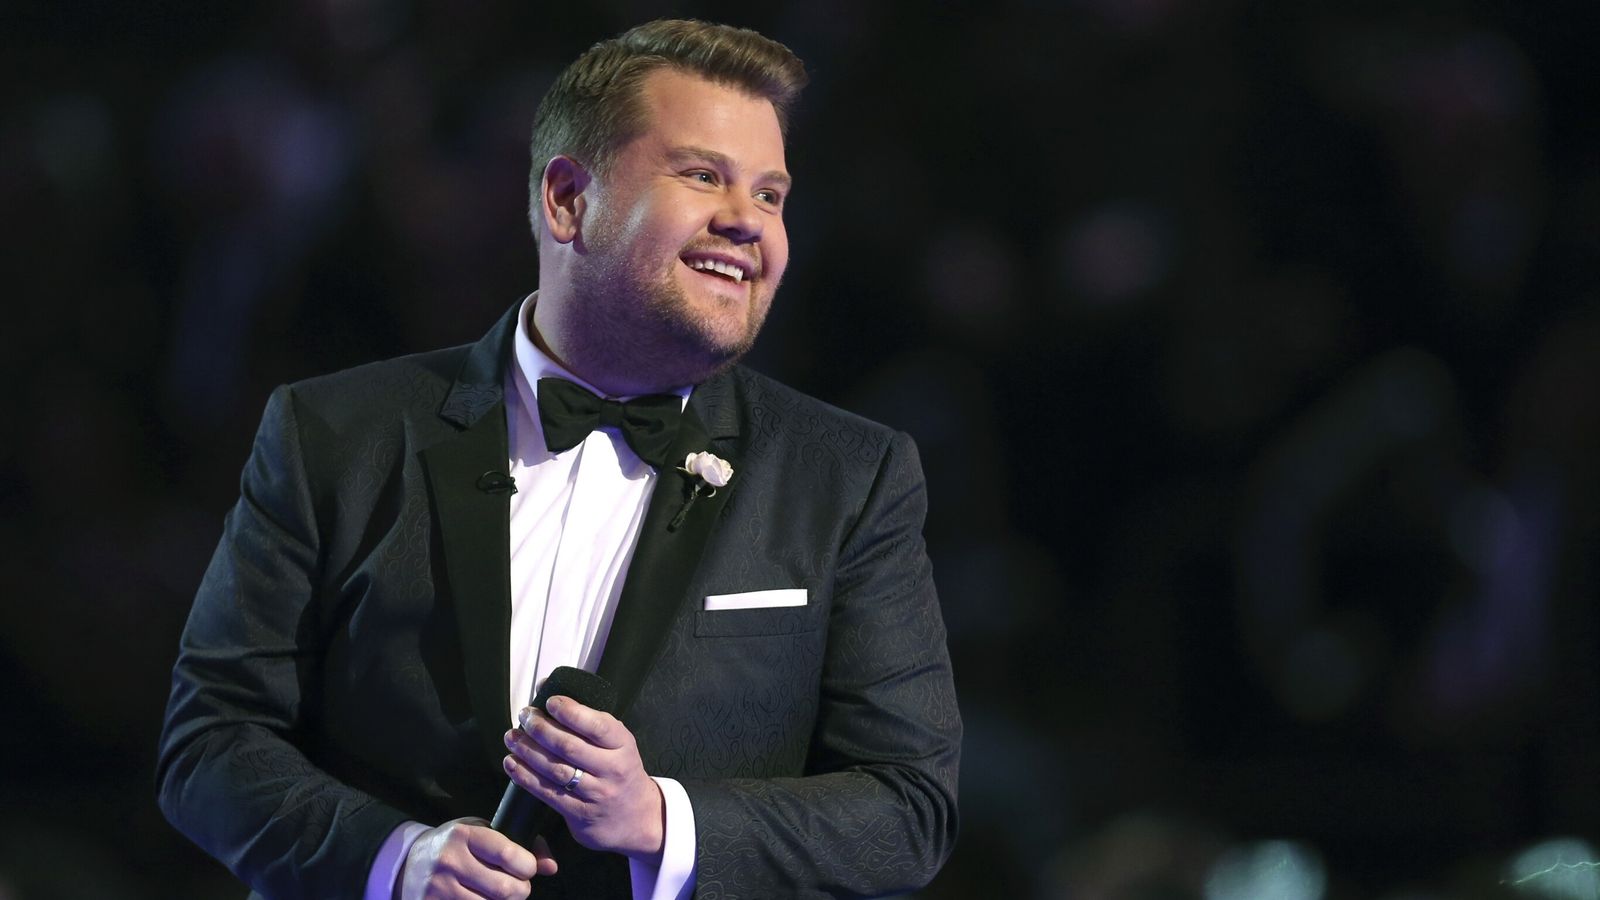 James Corden ends his eight-year stint on The Late Late Show with appearances from Tom Cruise, Harry Styles and Adele